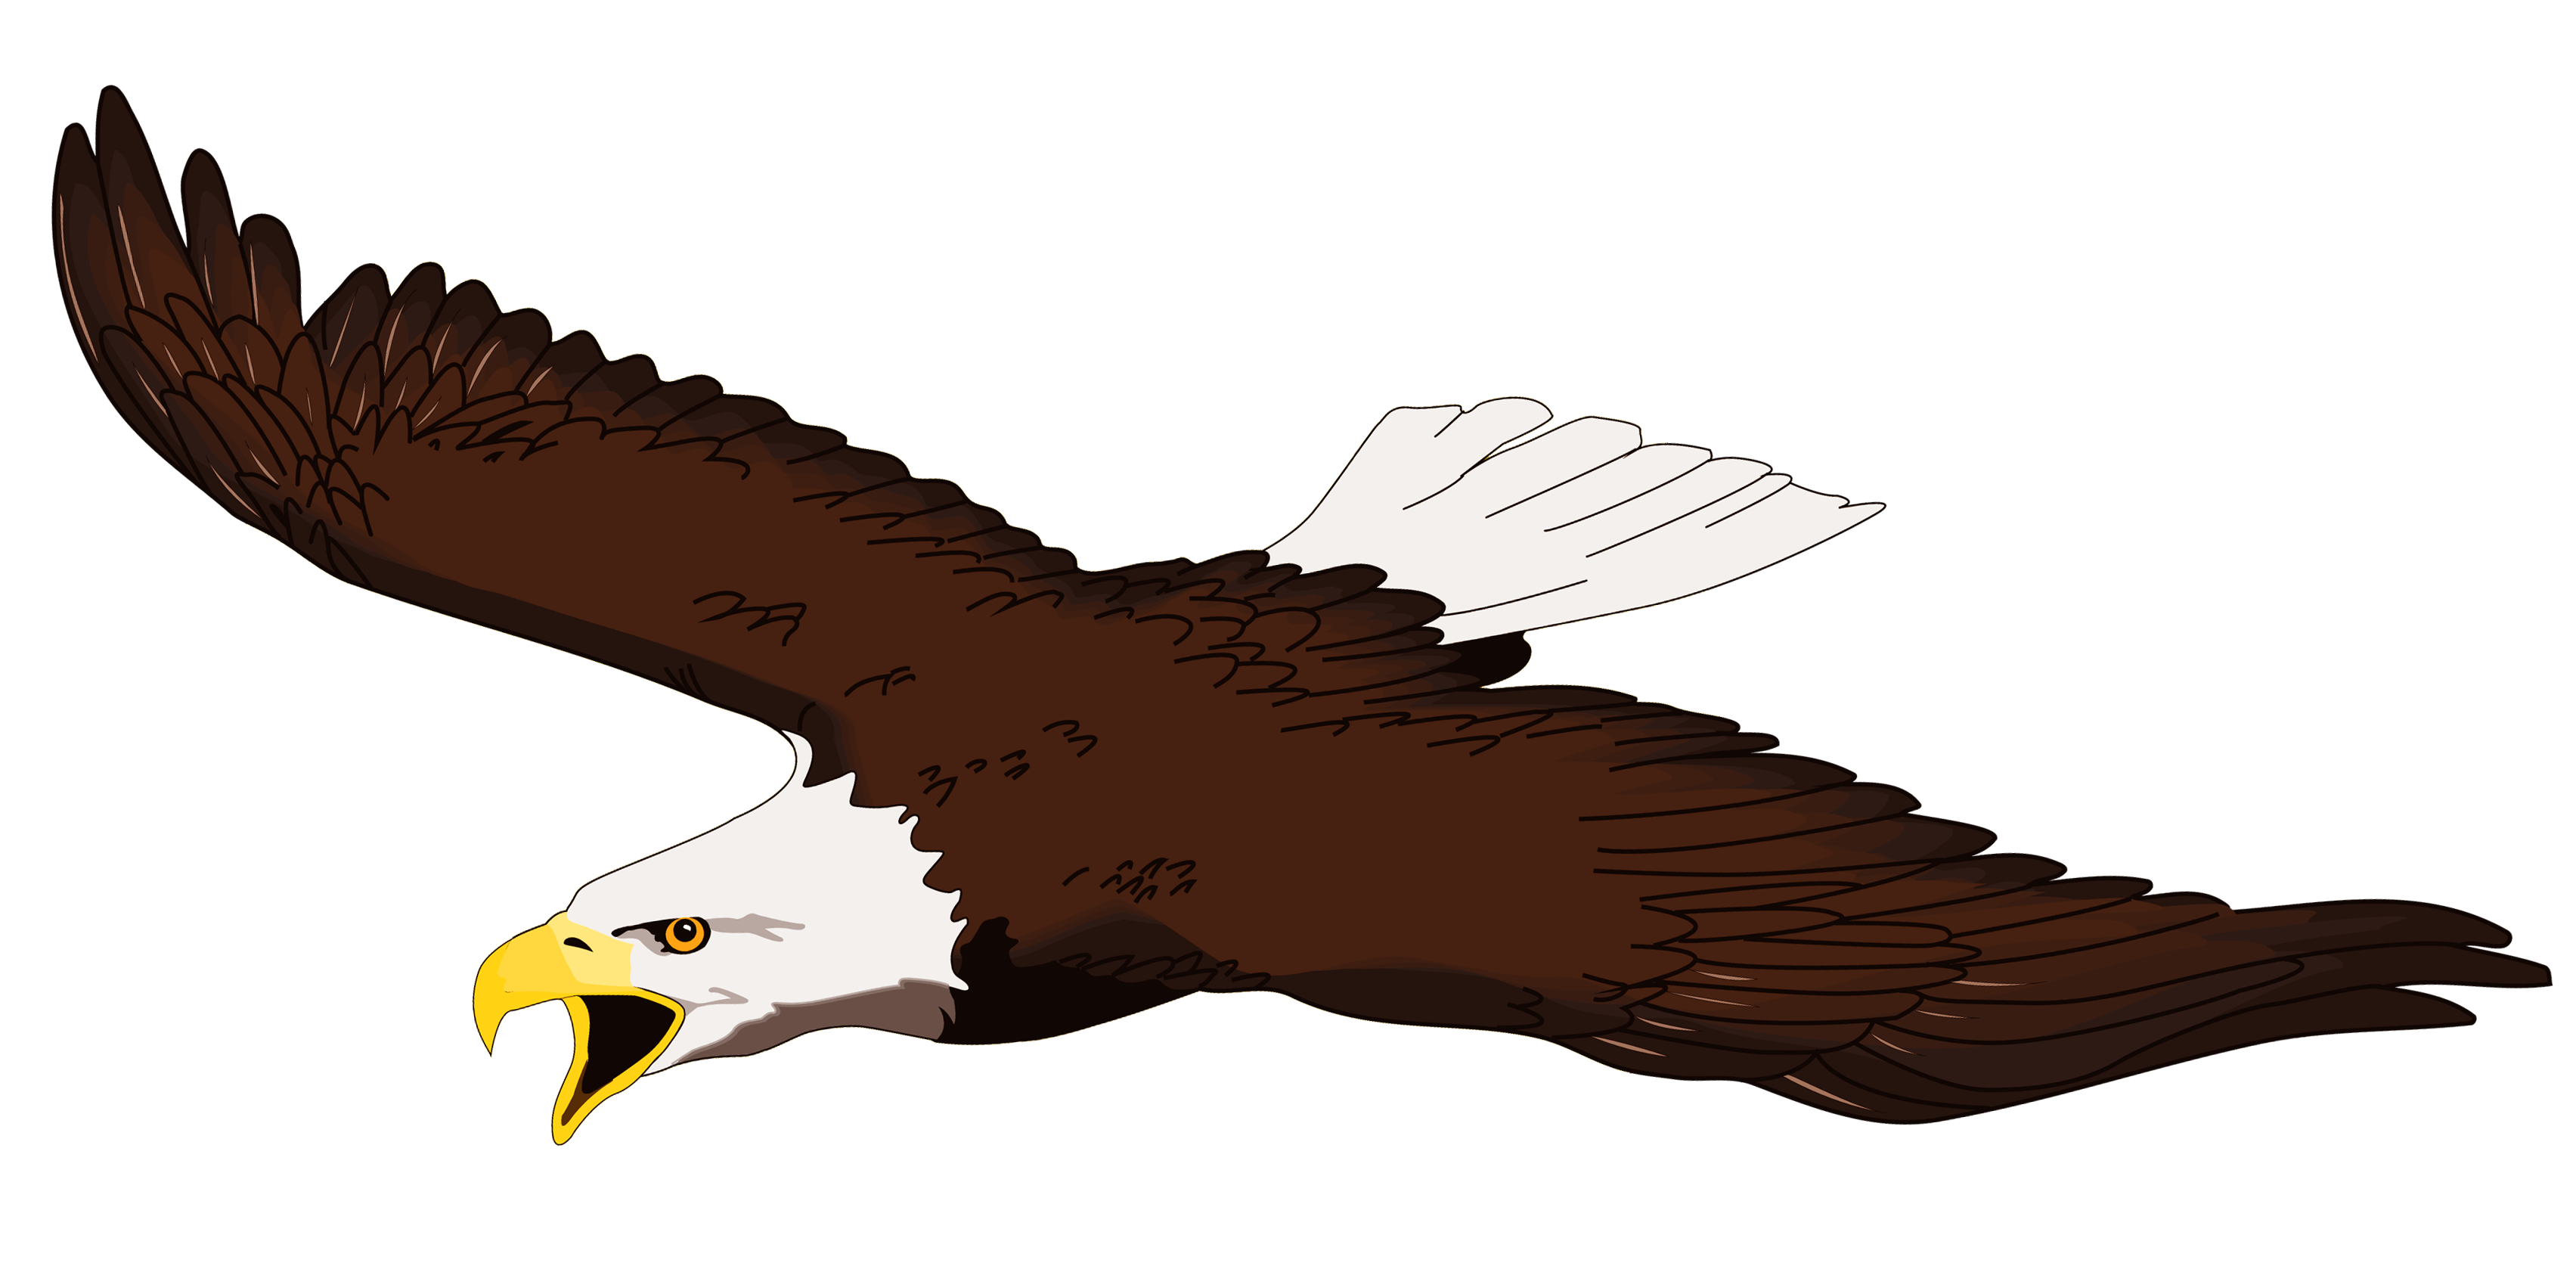 free clipart of bald eagles - photo #16